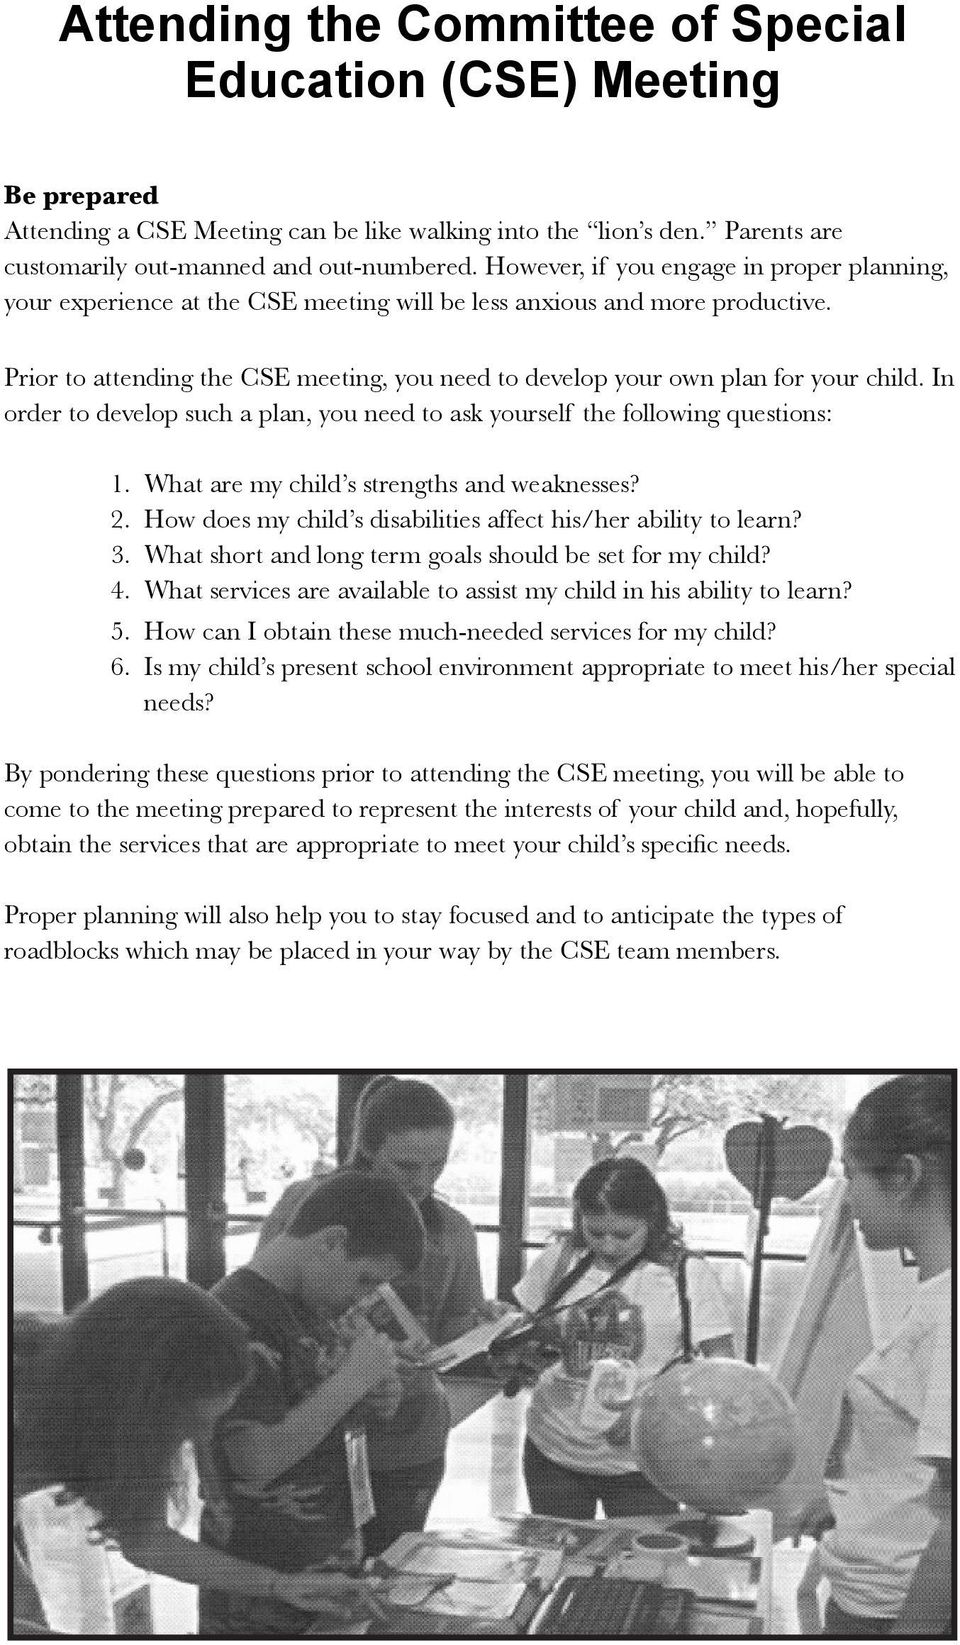 Prior to attending the CSE meeting, you need to develop your own plan for your child. In order to develop such a plan, you need to ask yourself the following questions: 1.